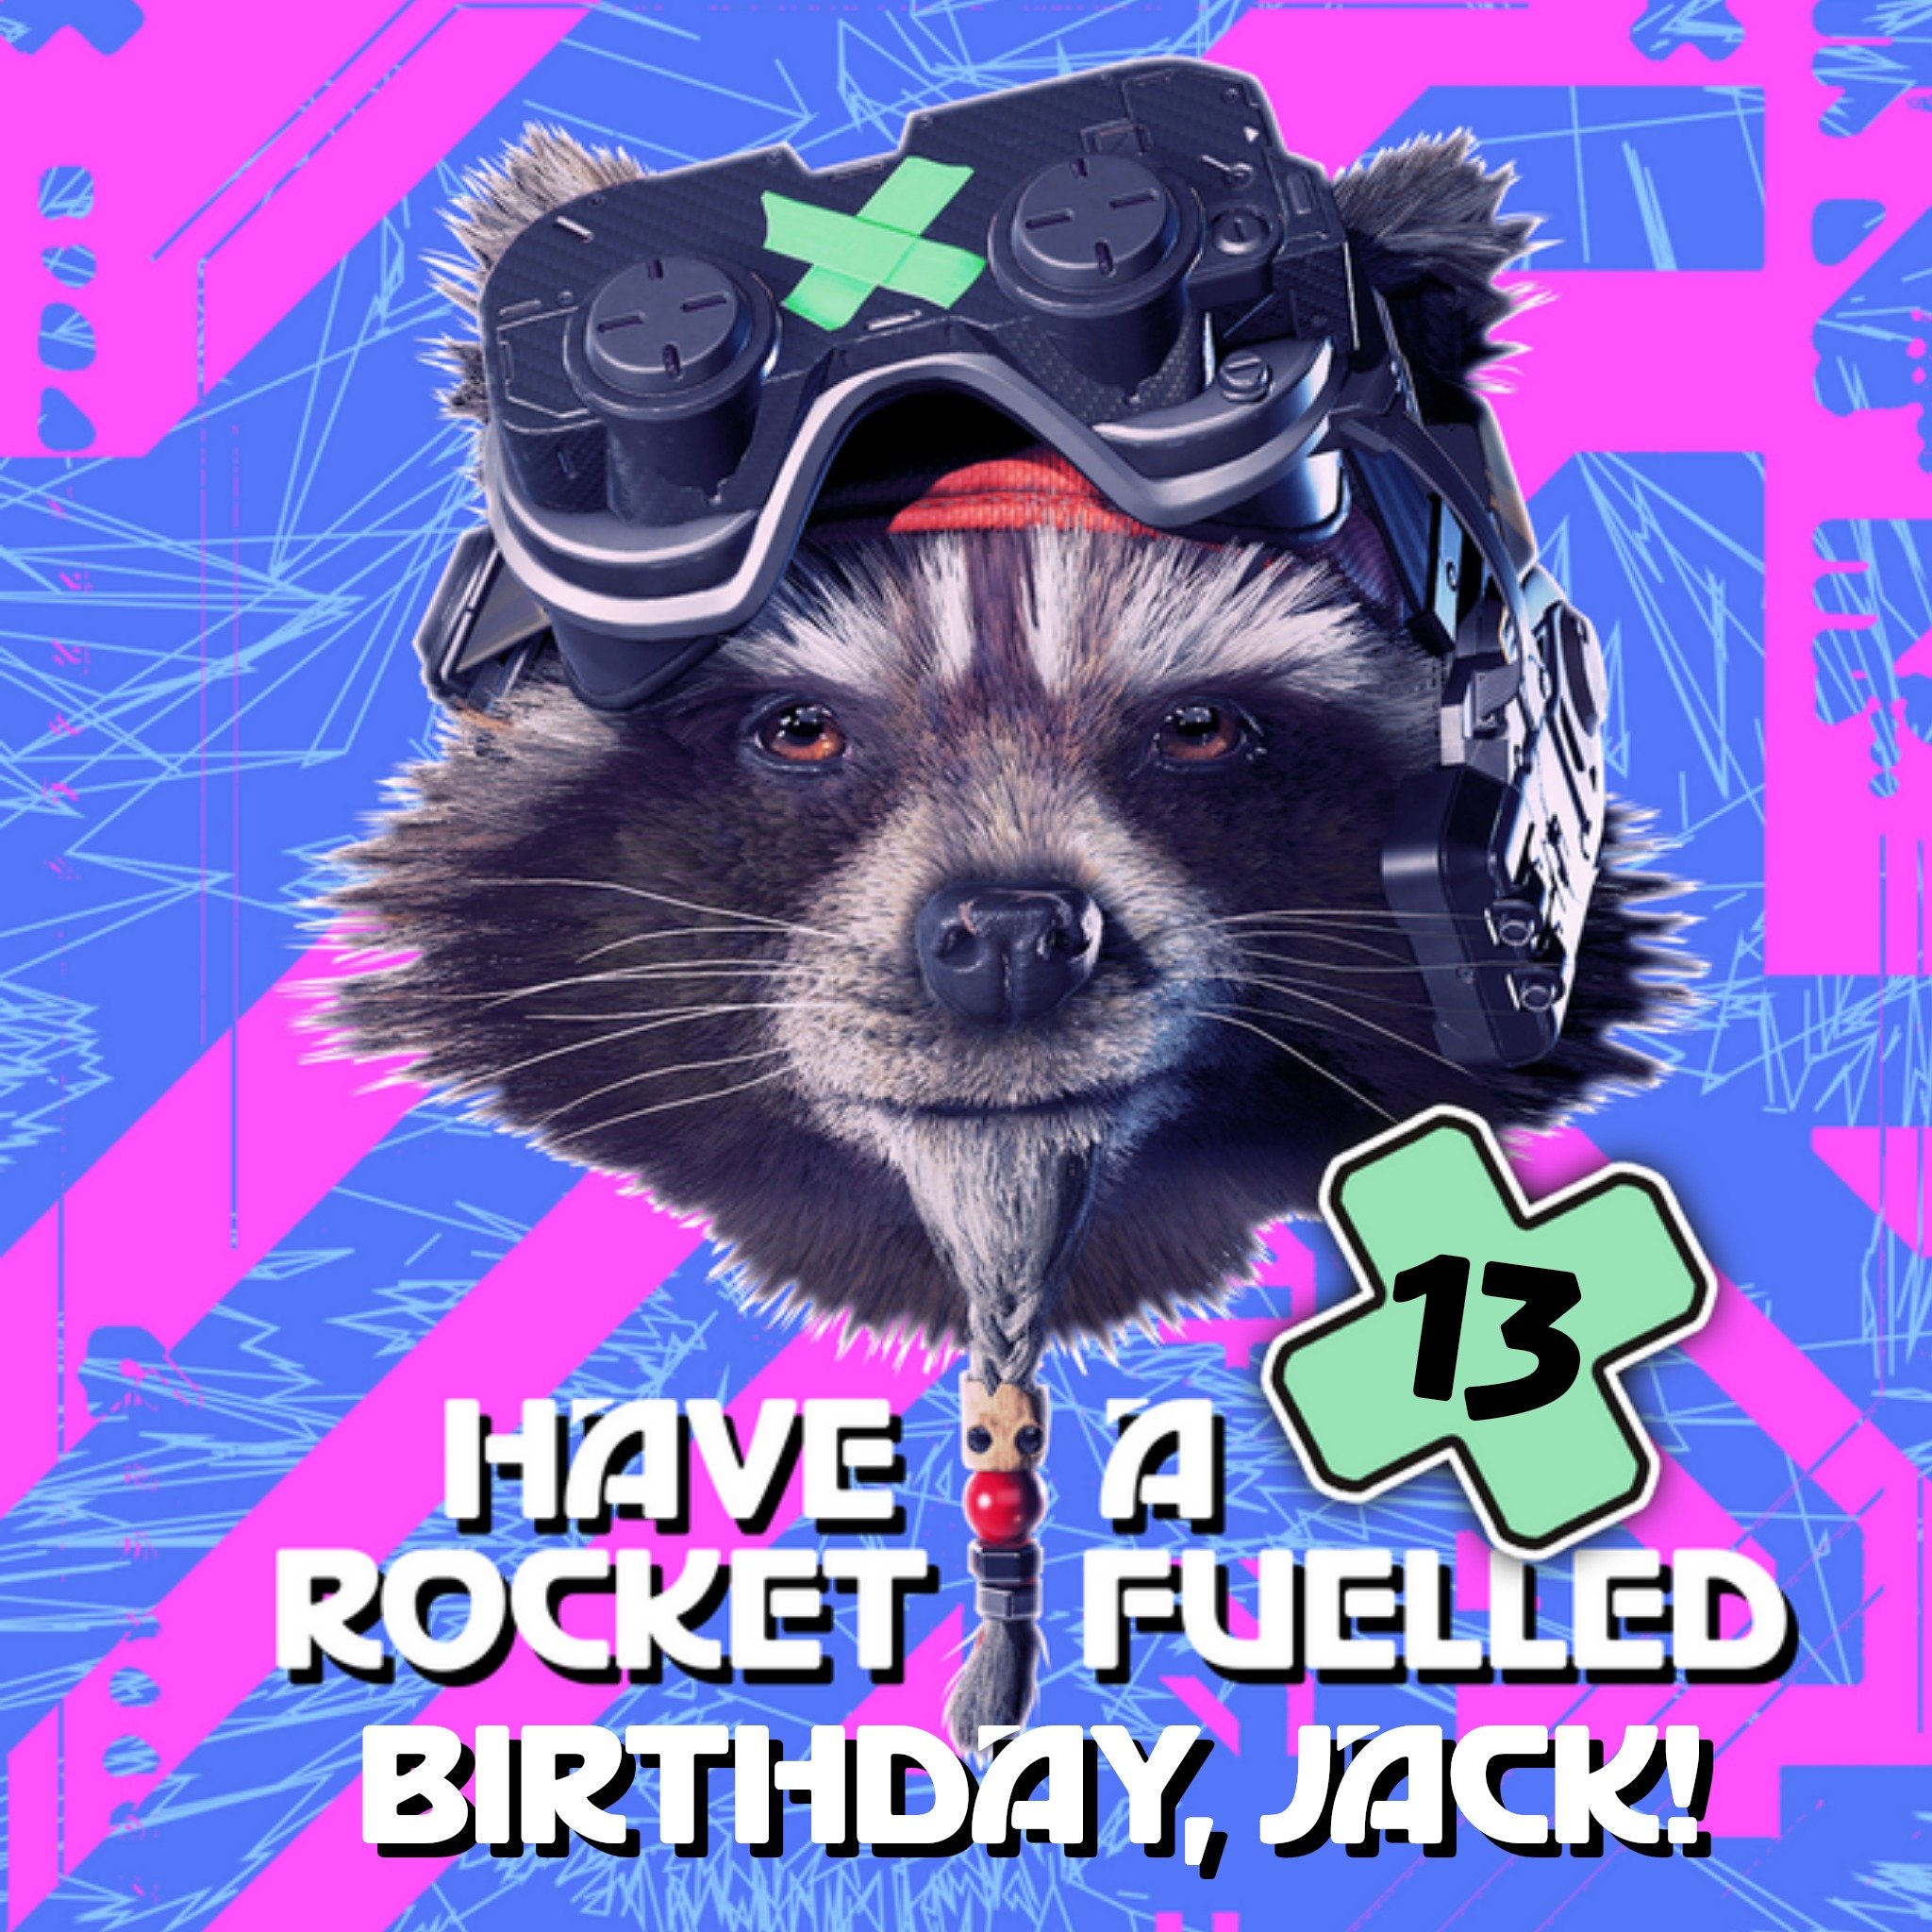 Marvel Guardians Of The Galaxy Rocket Fuelled Birthday Card, Square